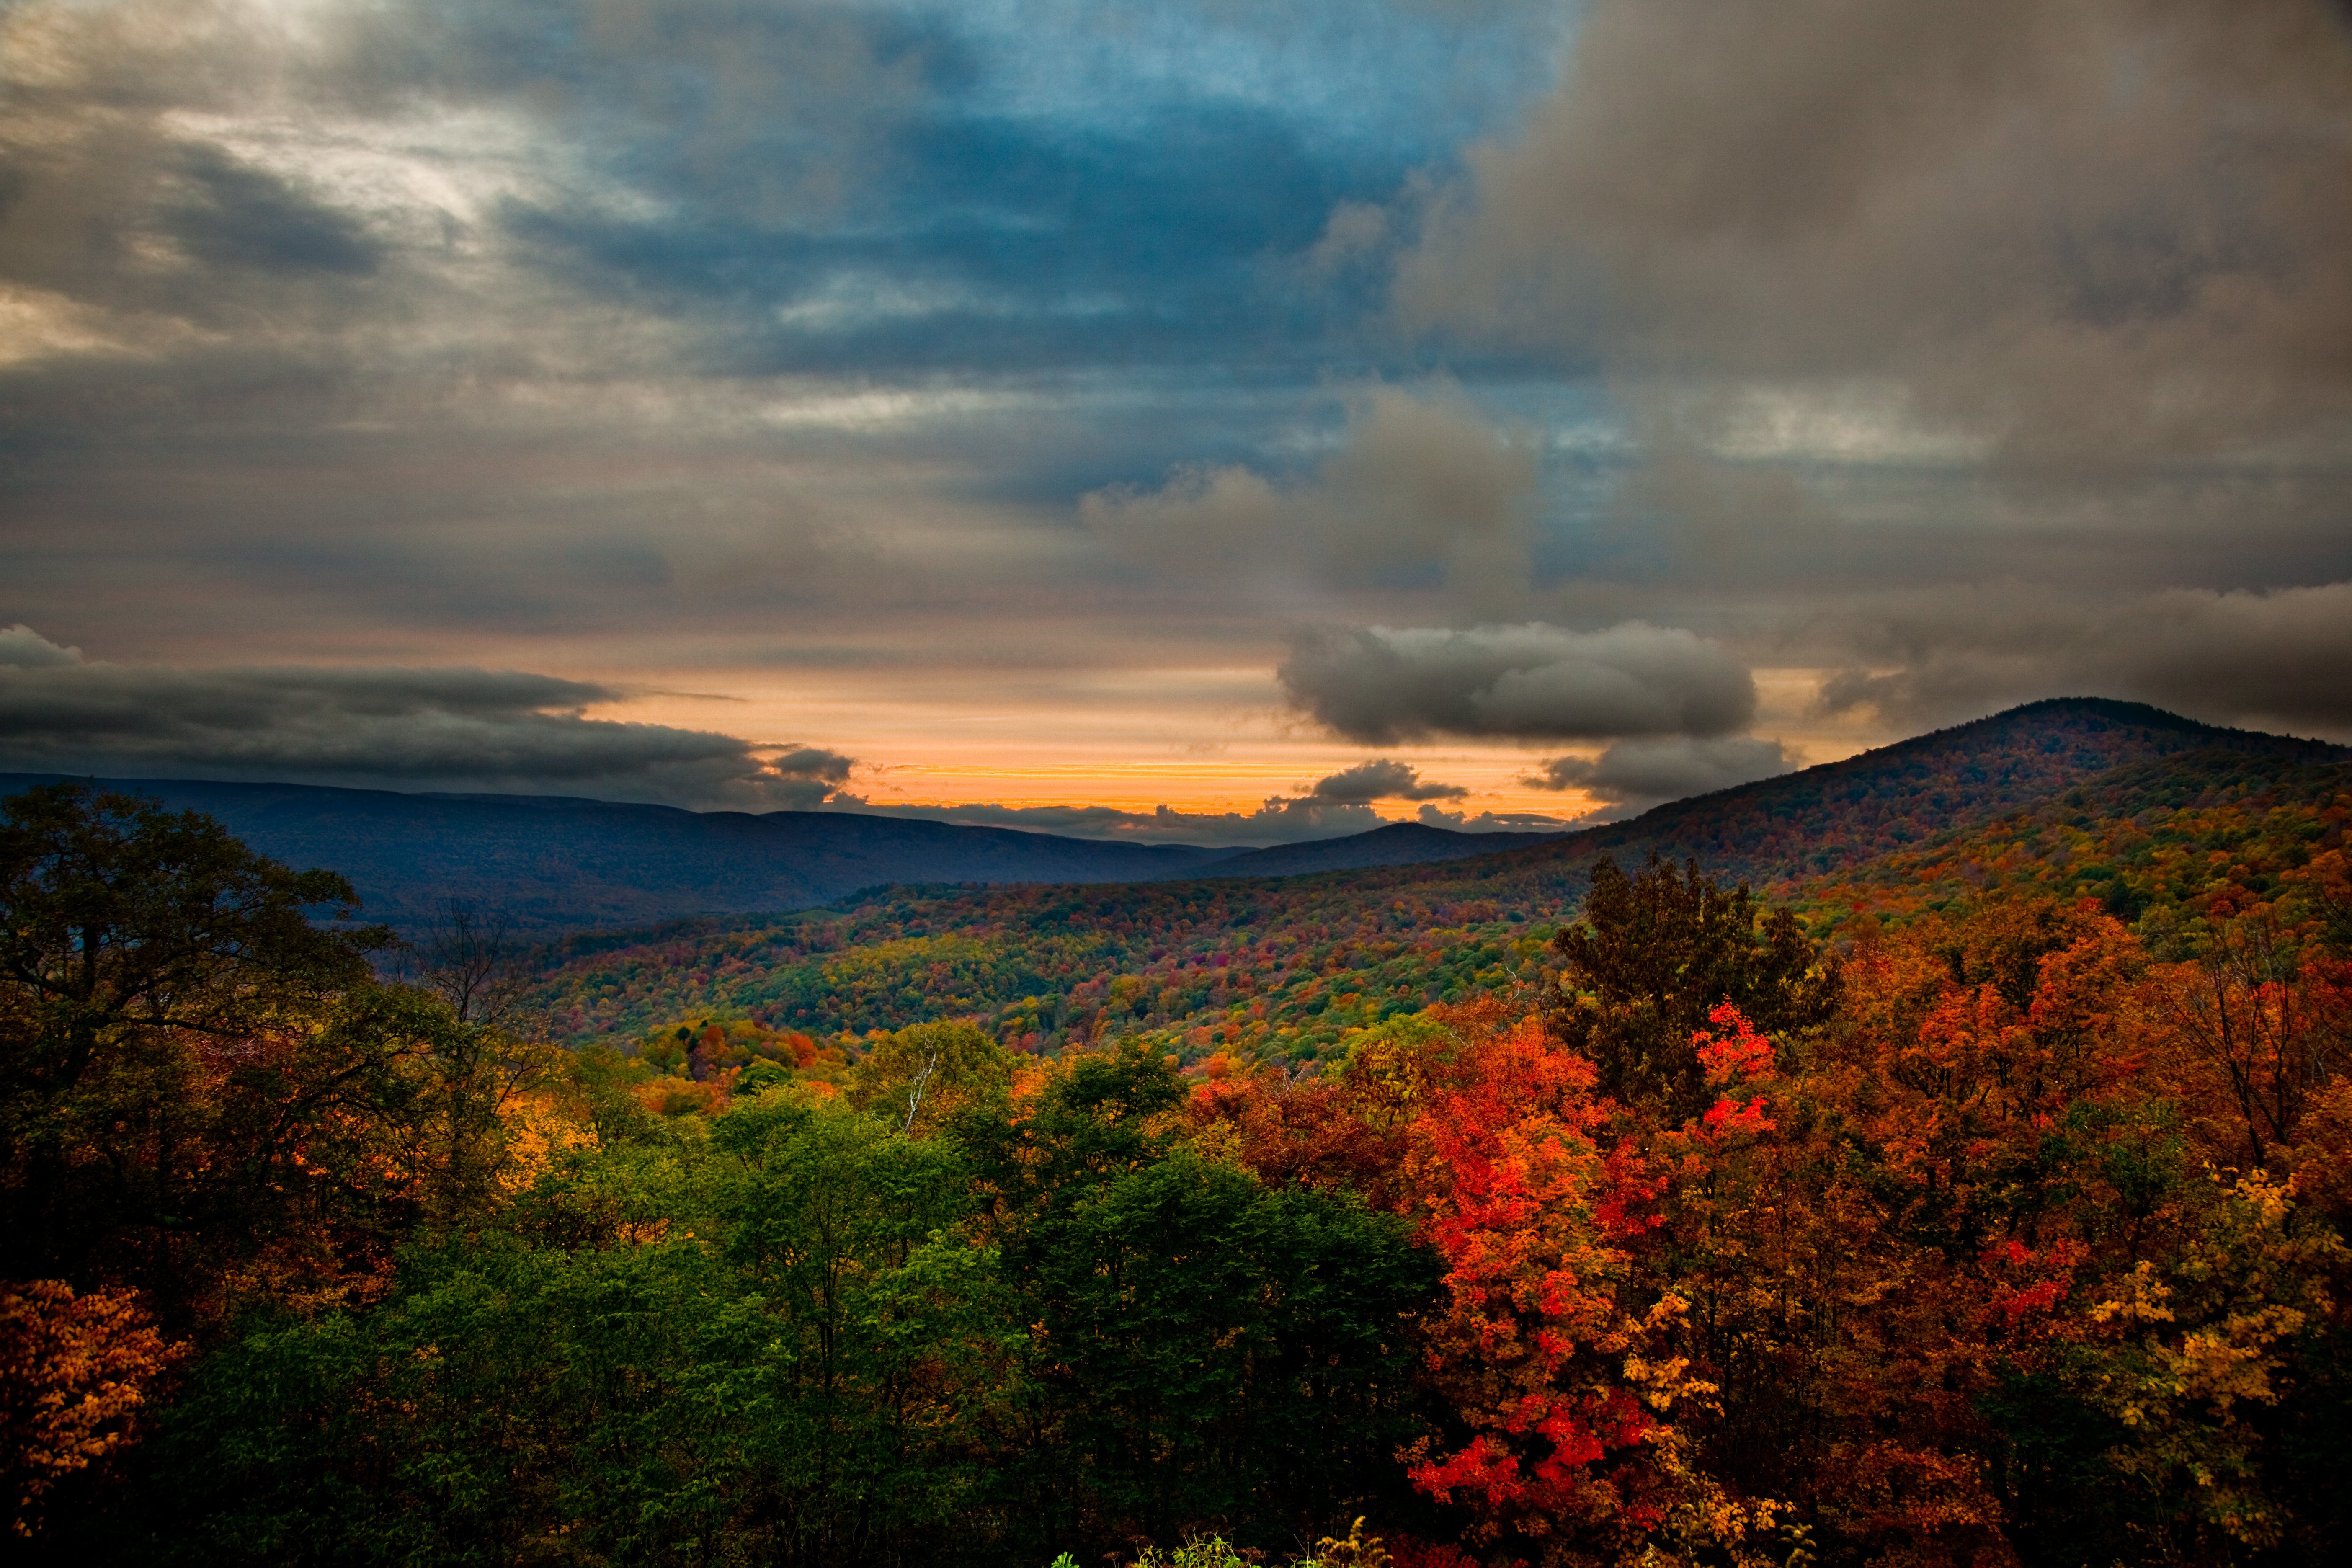 Autumn Colors Mountain Sunset | Mountain Views| Free Nature Pictures by